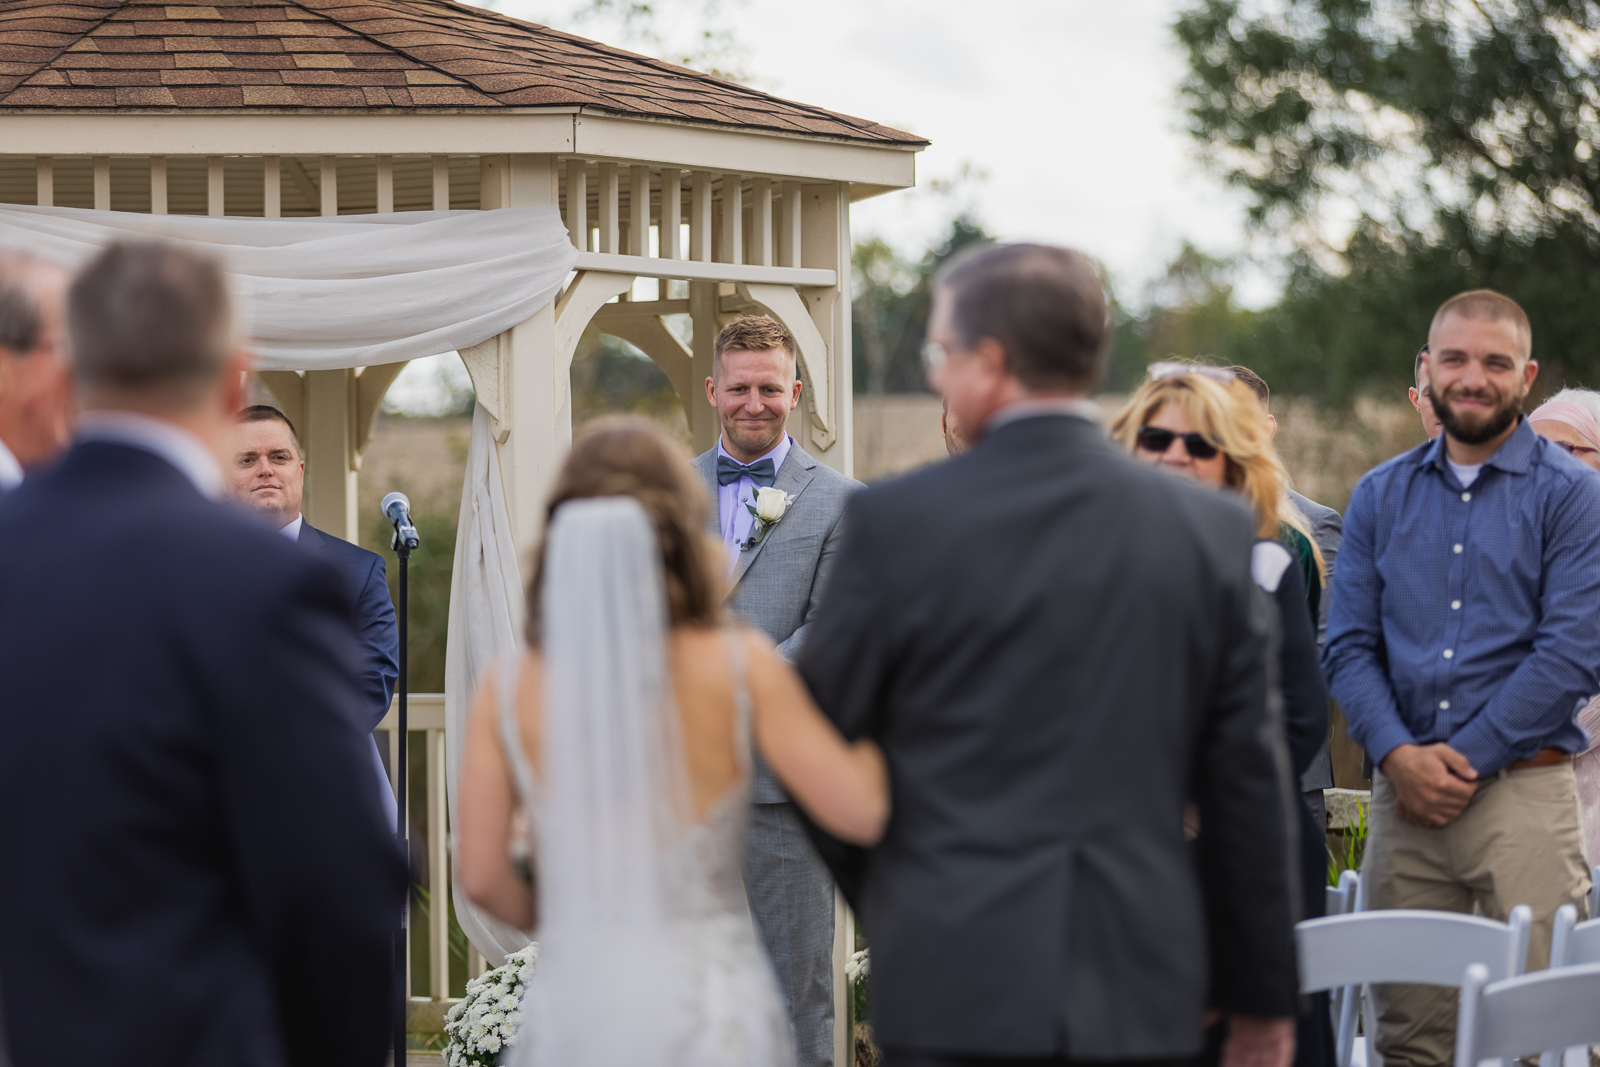 Bride and groom, first look, bridal march, bridal processional, gazebo, fall wedding, rustic outdoor wedding ceremony at White Birch Barn